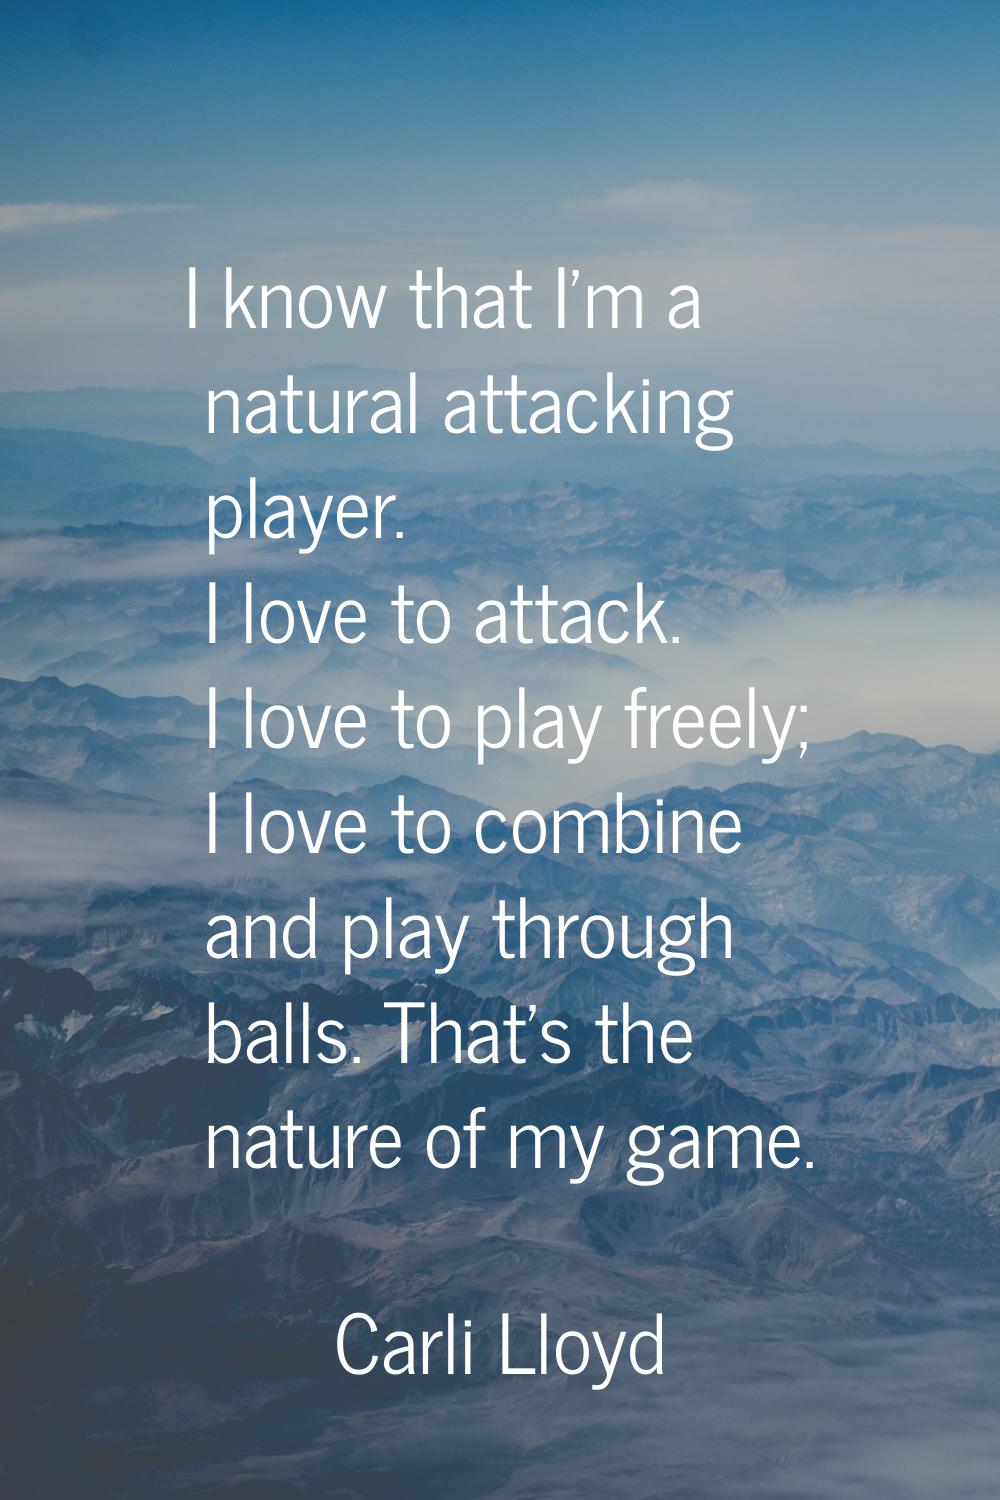 I know that I'm a natural attacking player. I love to attack. I love to play freely; I love to comb